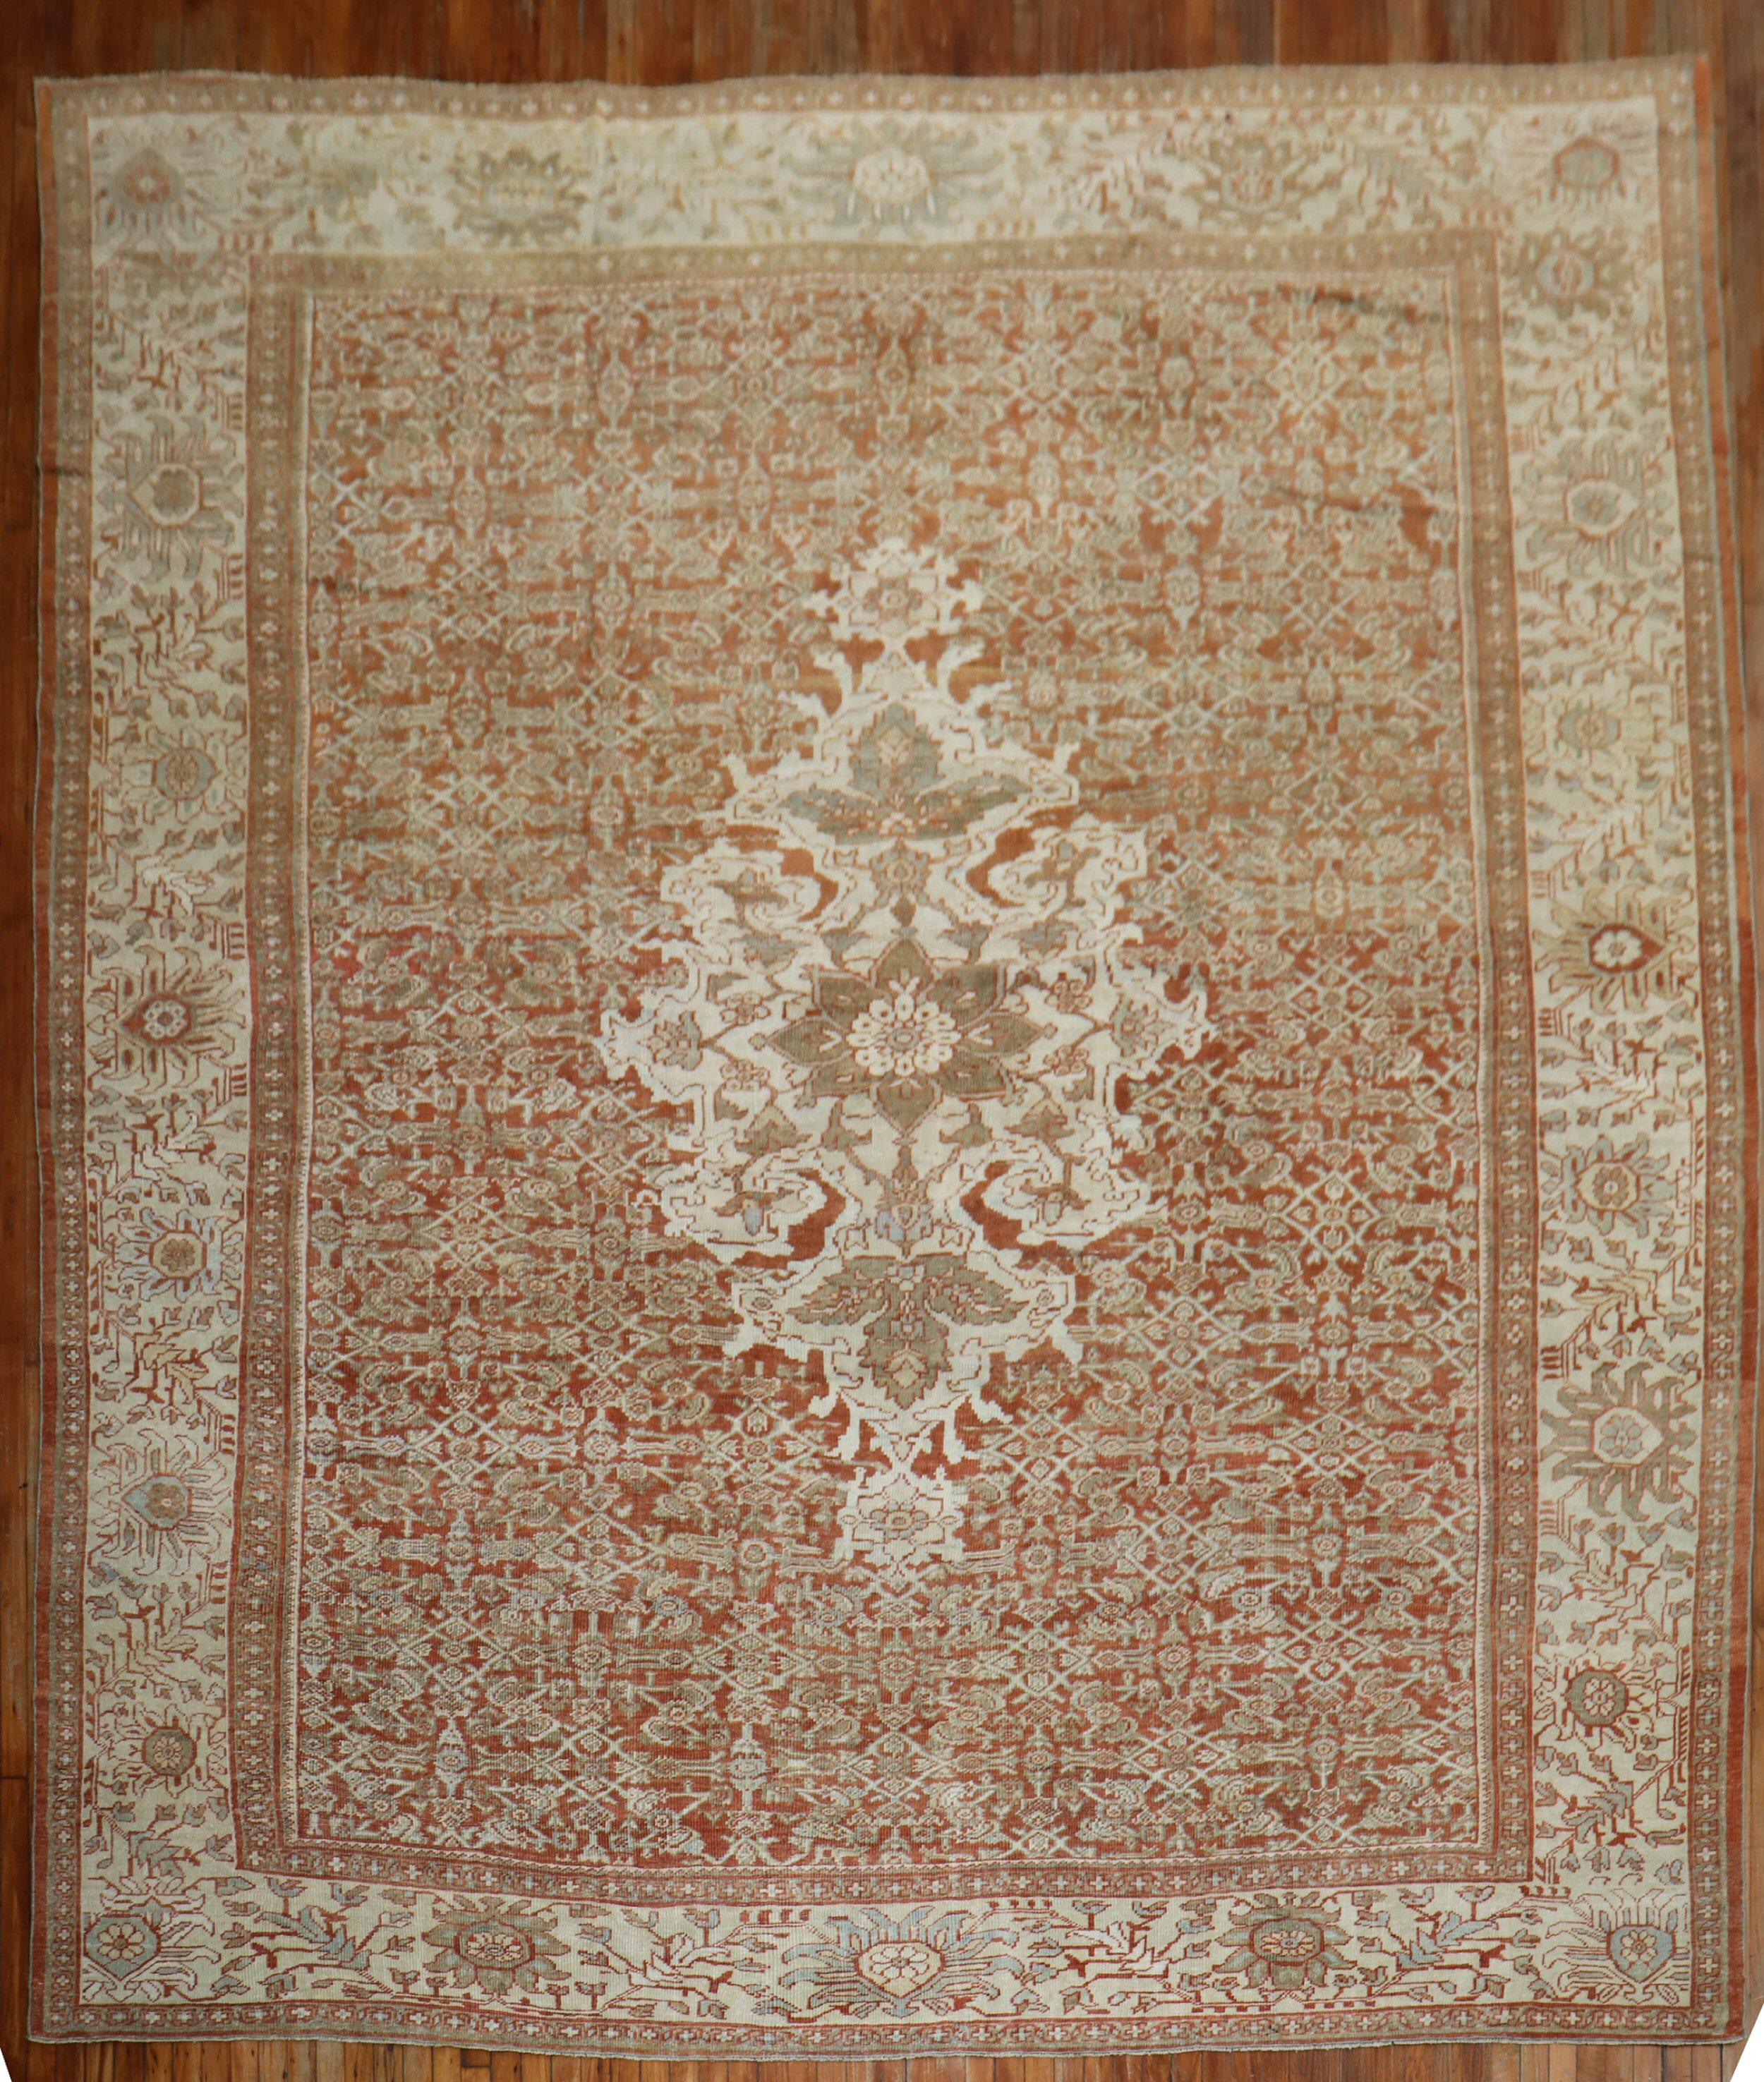 An antique Persian Mahal Sultanabad room size square decorative rug from the 1st quarter of the 20th century

Measures: 11'2” x 12'4